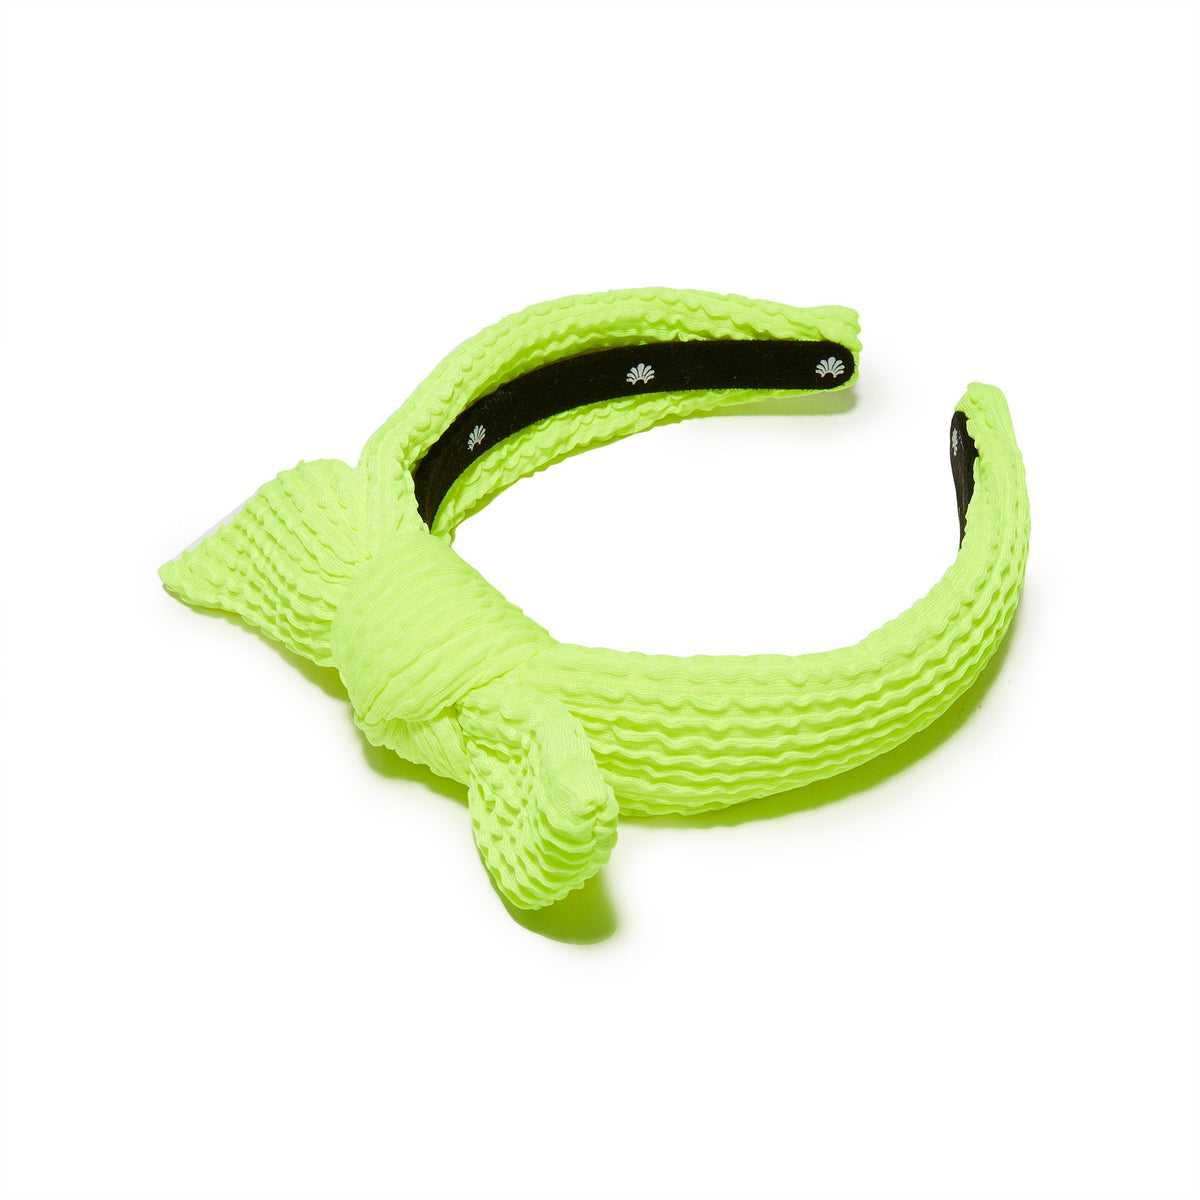 Lele Sadoughi HEADBANDS ONE SIZE CHARTREUSE SWIMMER KIDS BOW TIE KNOTTED HEADBAND